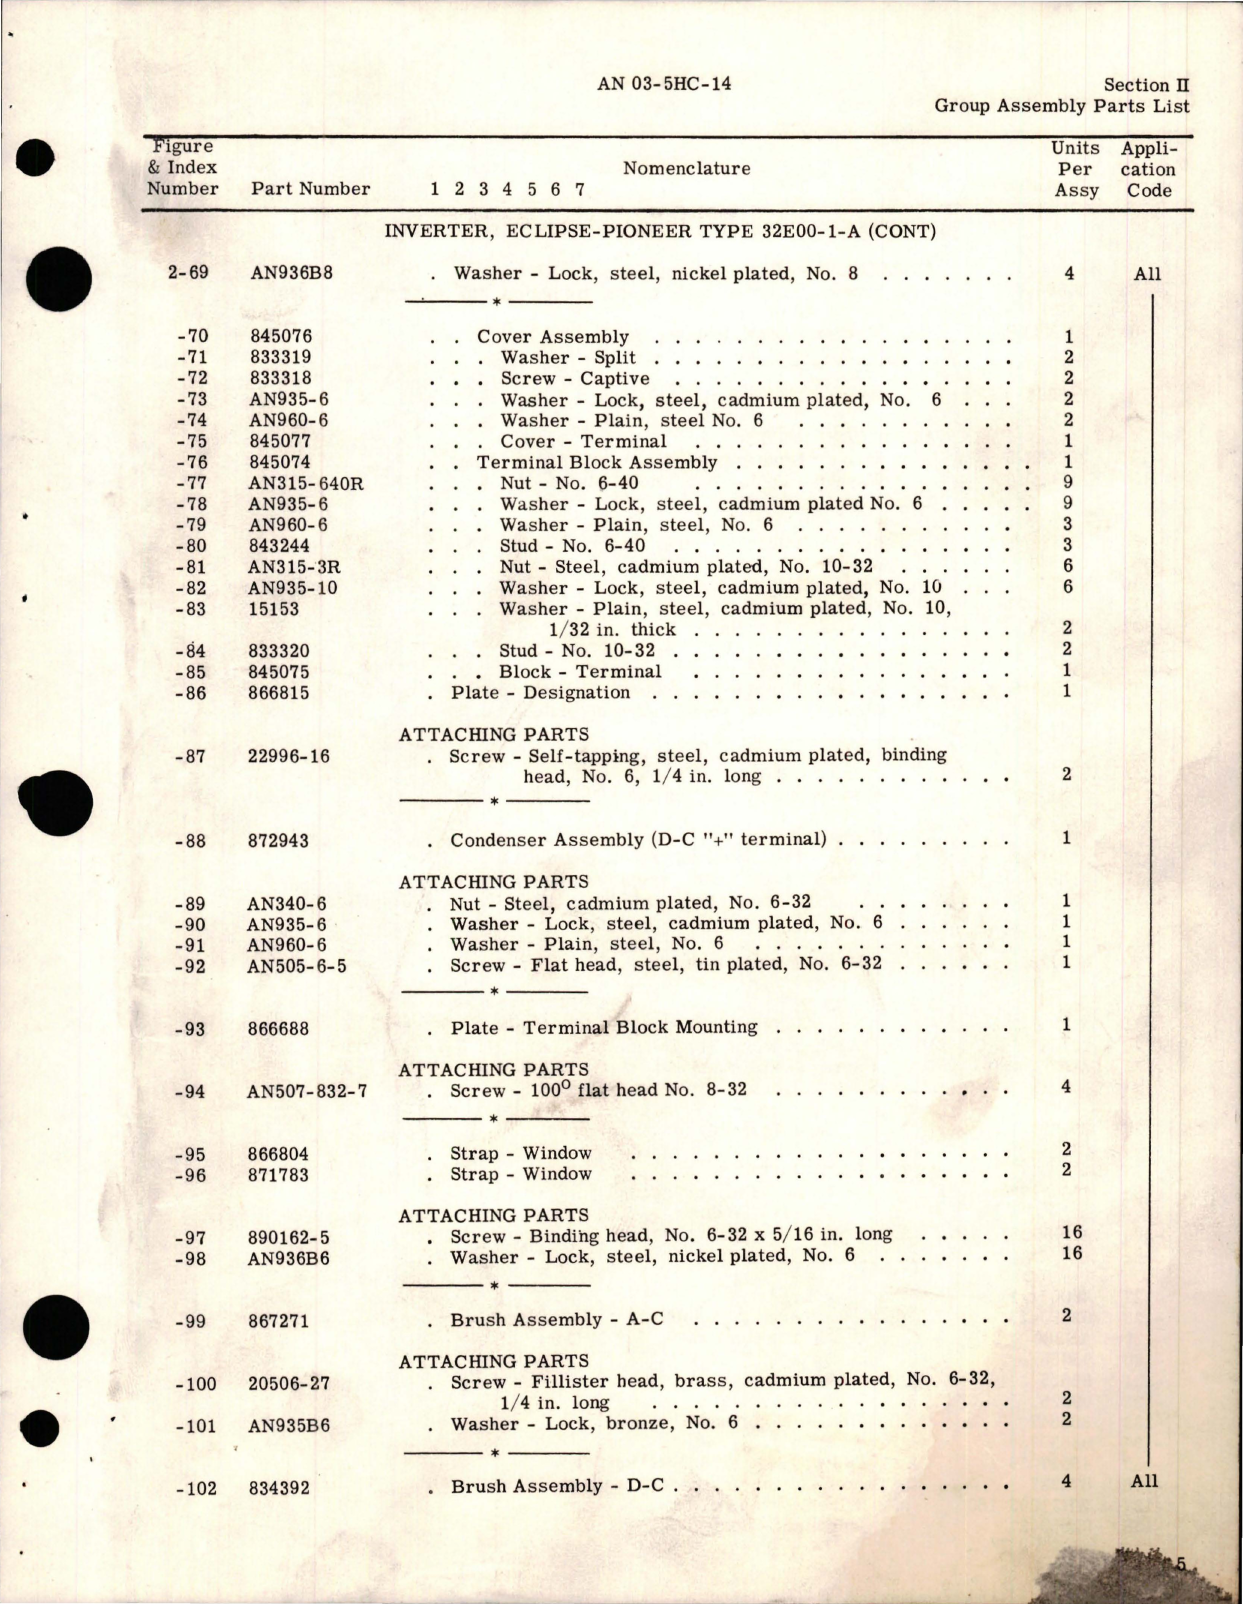 Sample page 9 from AirCorps Library document: Parts Catalog for Inverter - Type AN-3534-1 - Part 32E00-1-A 